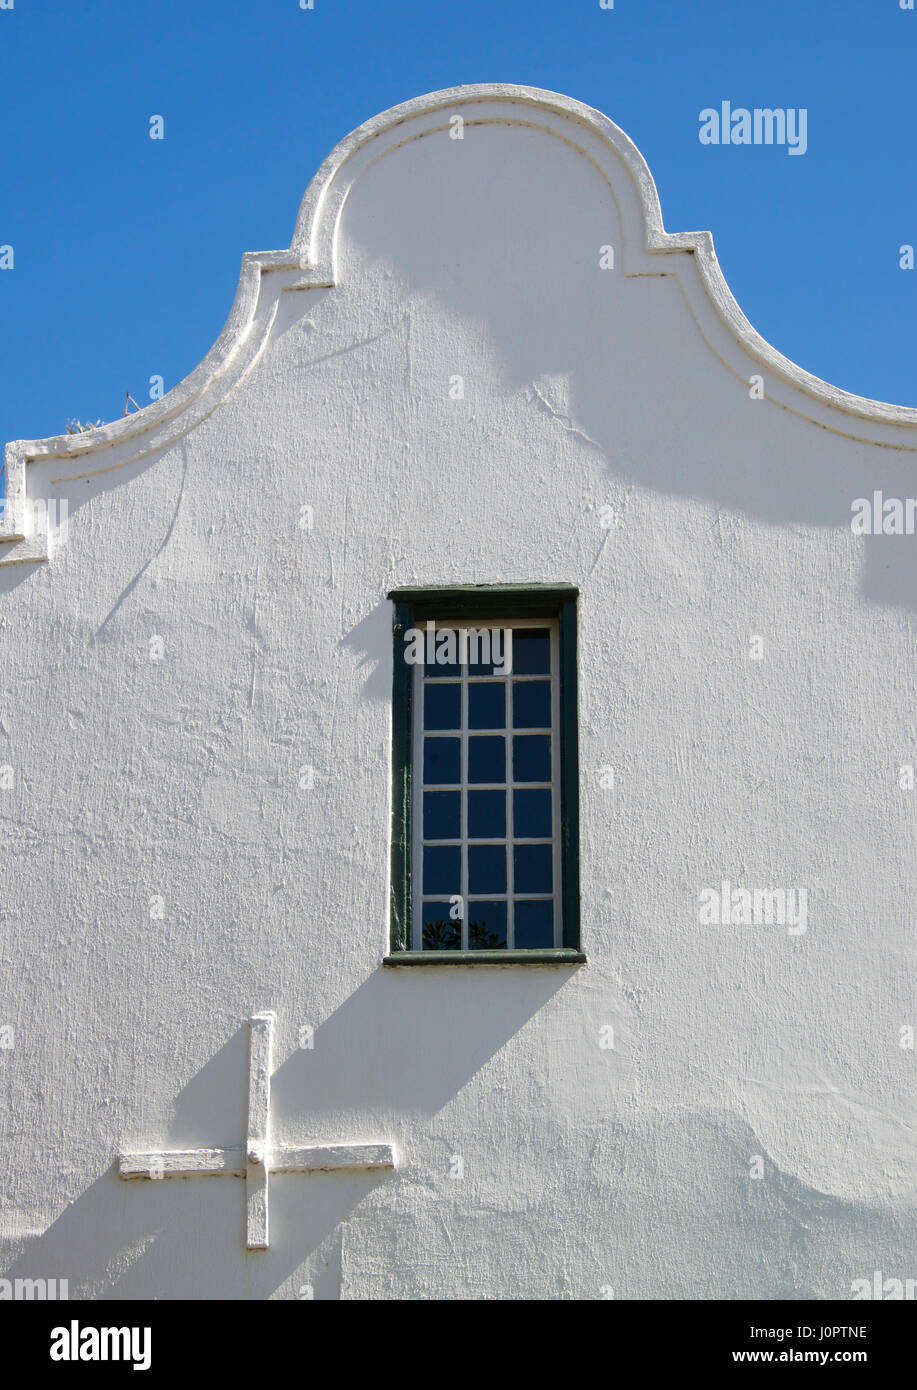 Fine example traditional Cape Dutch Holbol gable roof Mowbray Cape Town South Africa Stock Photo